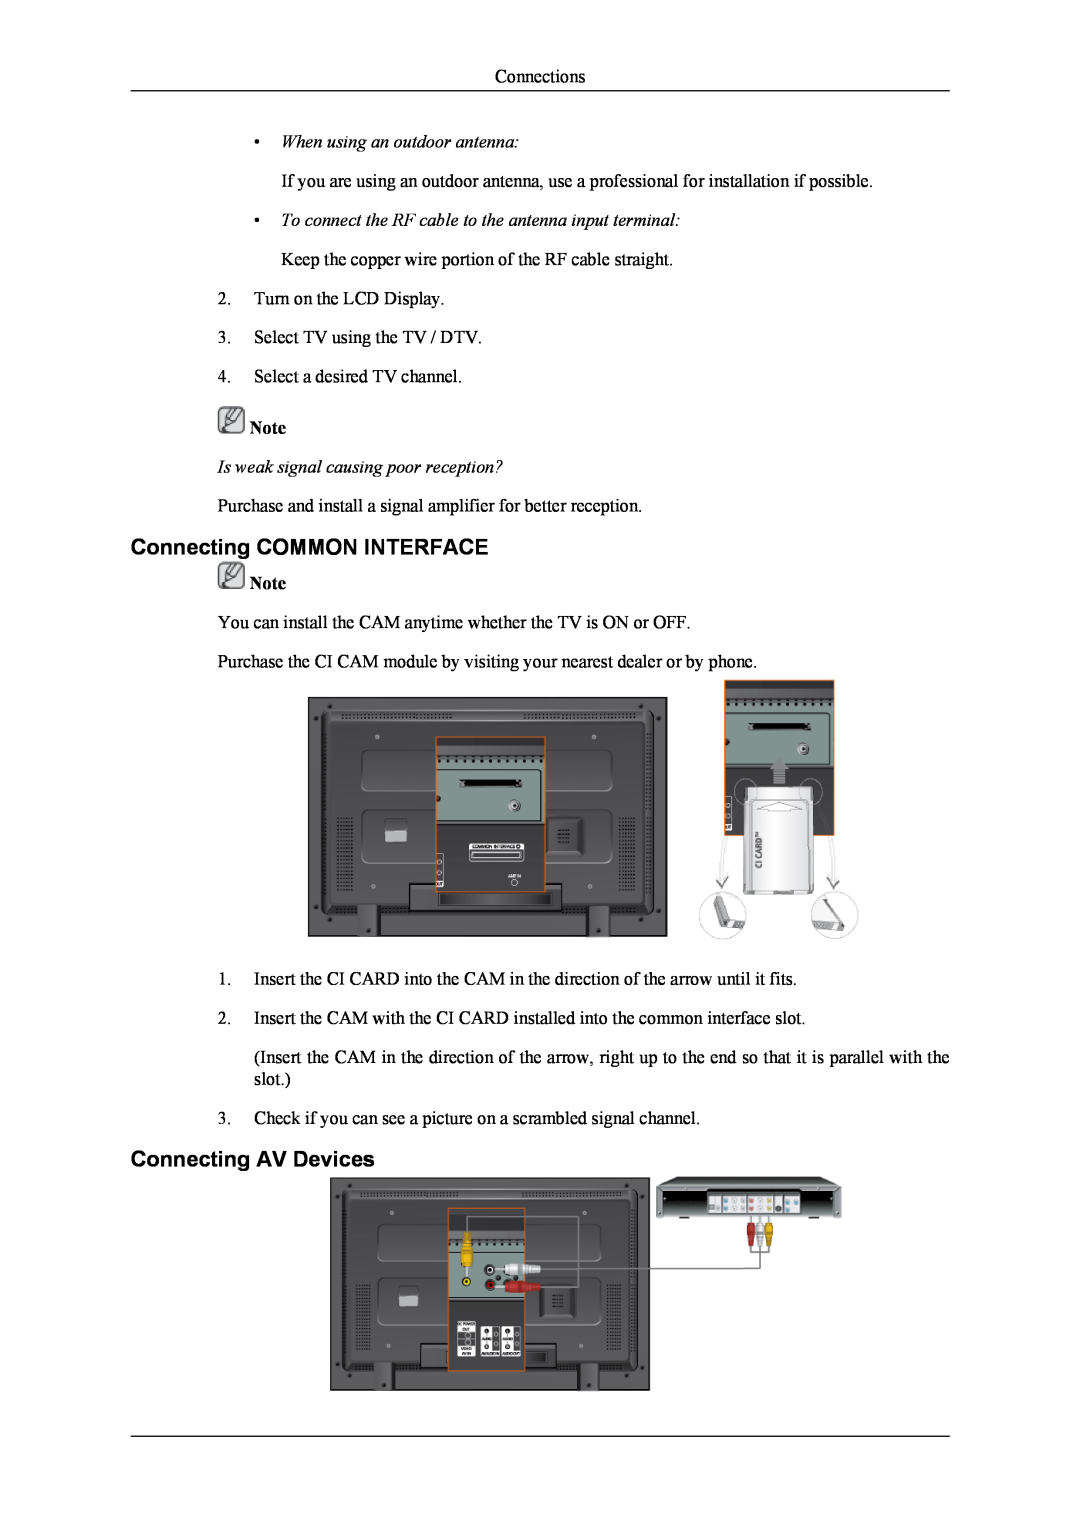 Samsung 400CXn quick start Connecting COMMON INTERFACE, Connecting AV Devices, When using an outdoor antenna 